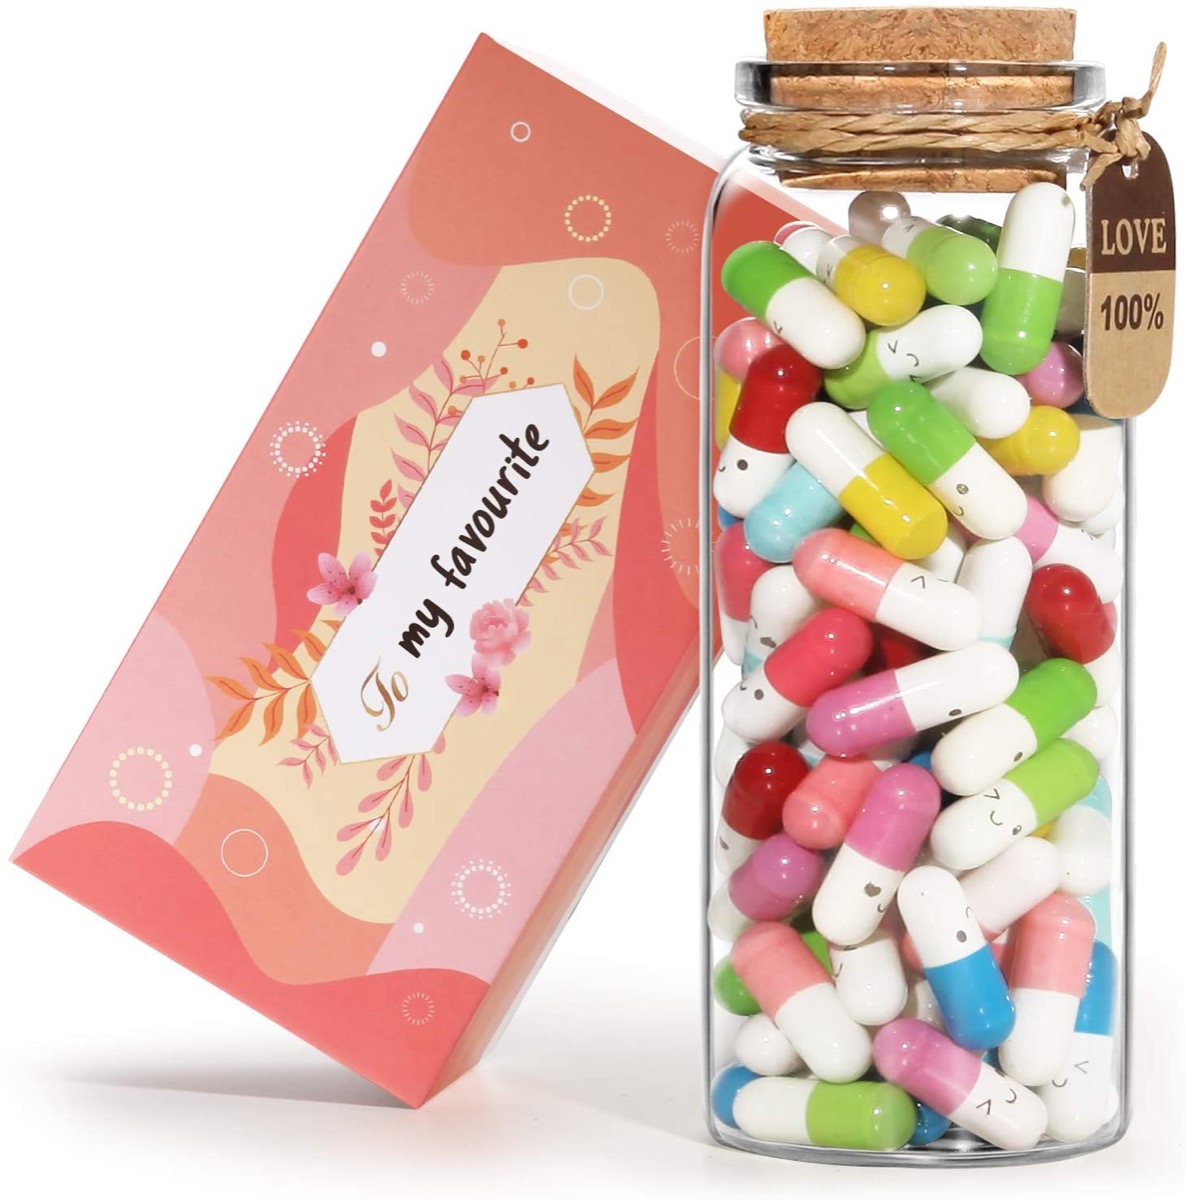 plastic capsules in a bottle next to a card